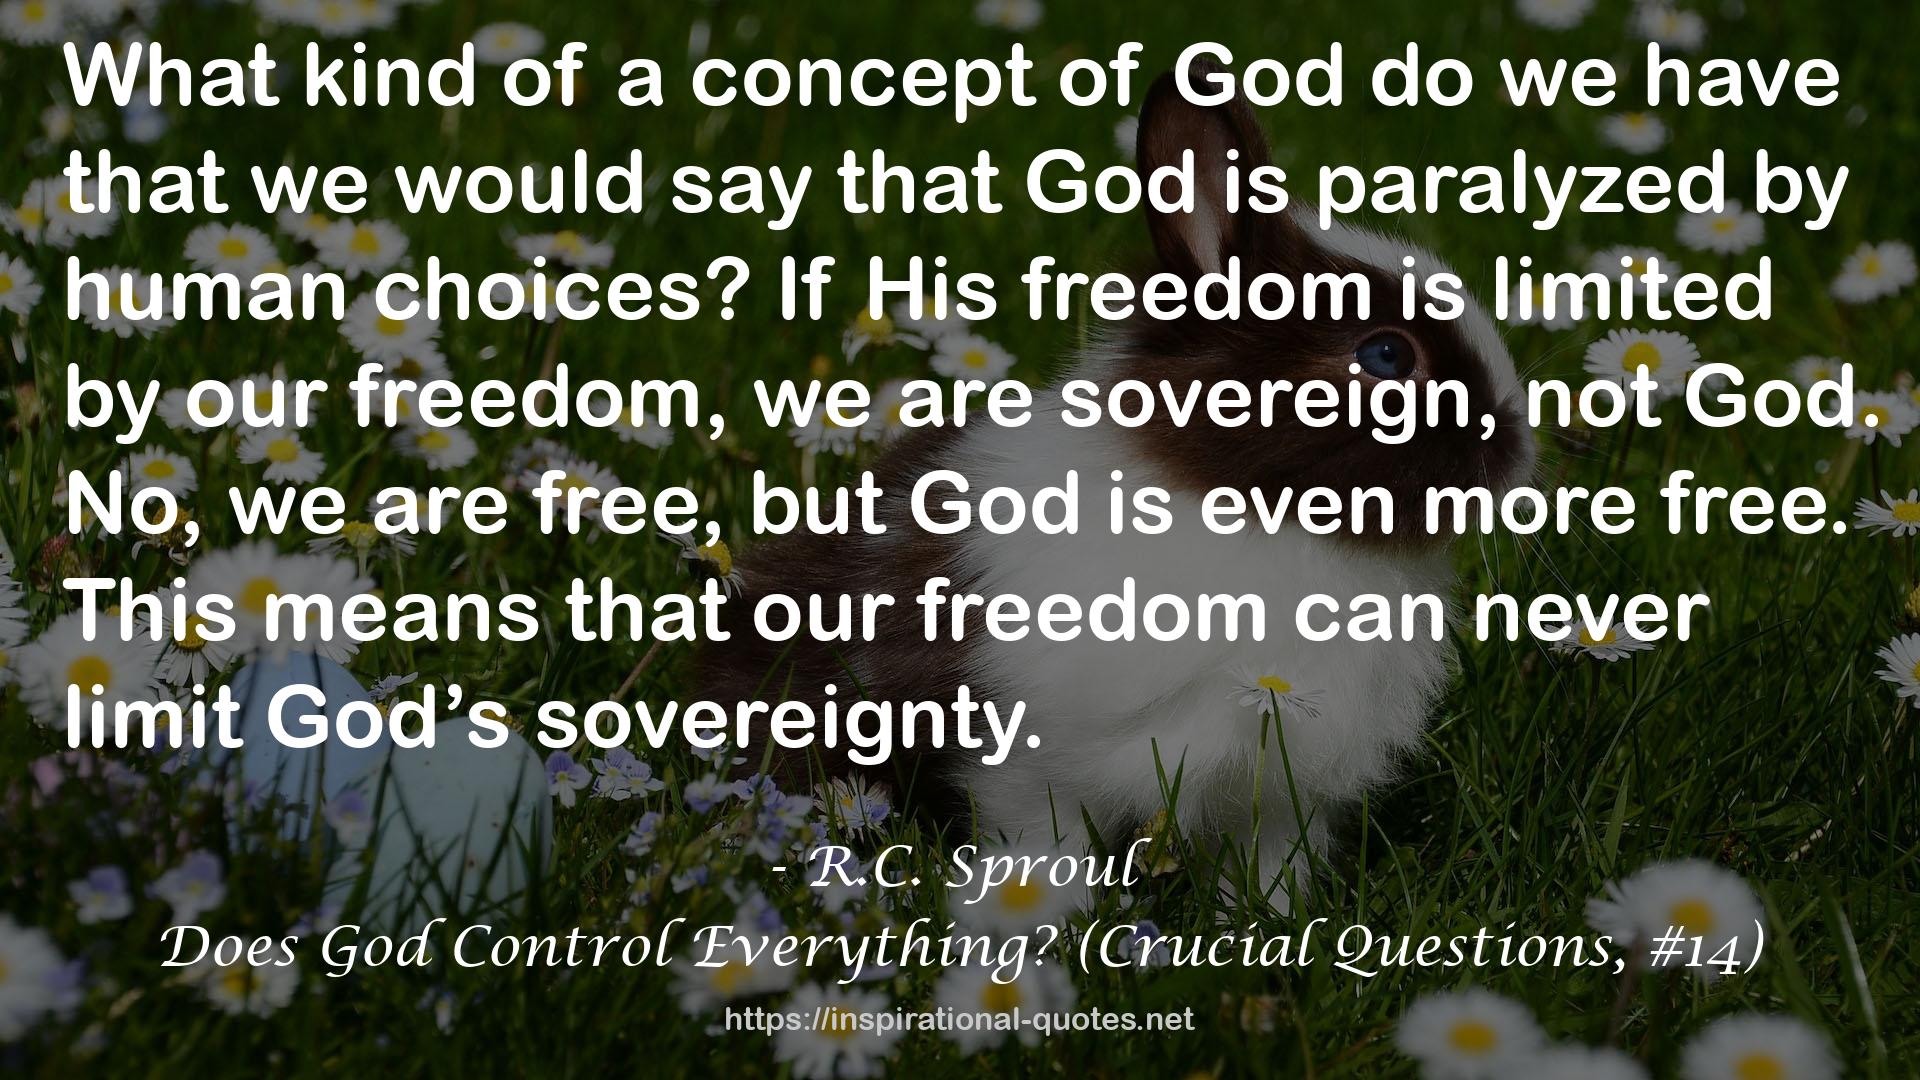 Does God Control Everything? (Crucial Questions, #14) QUOTES